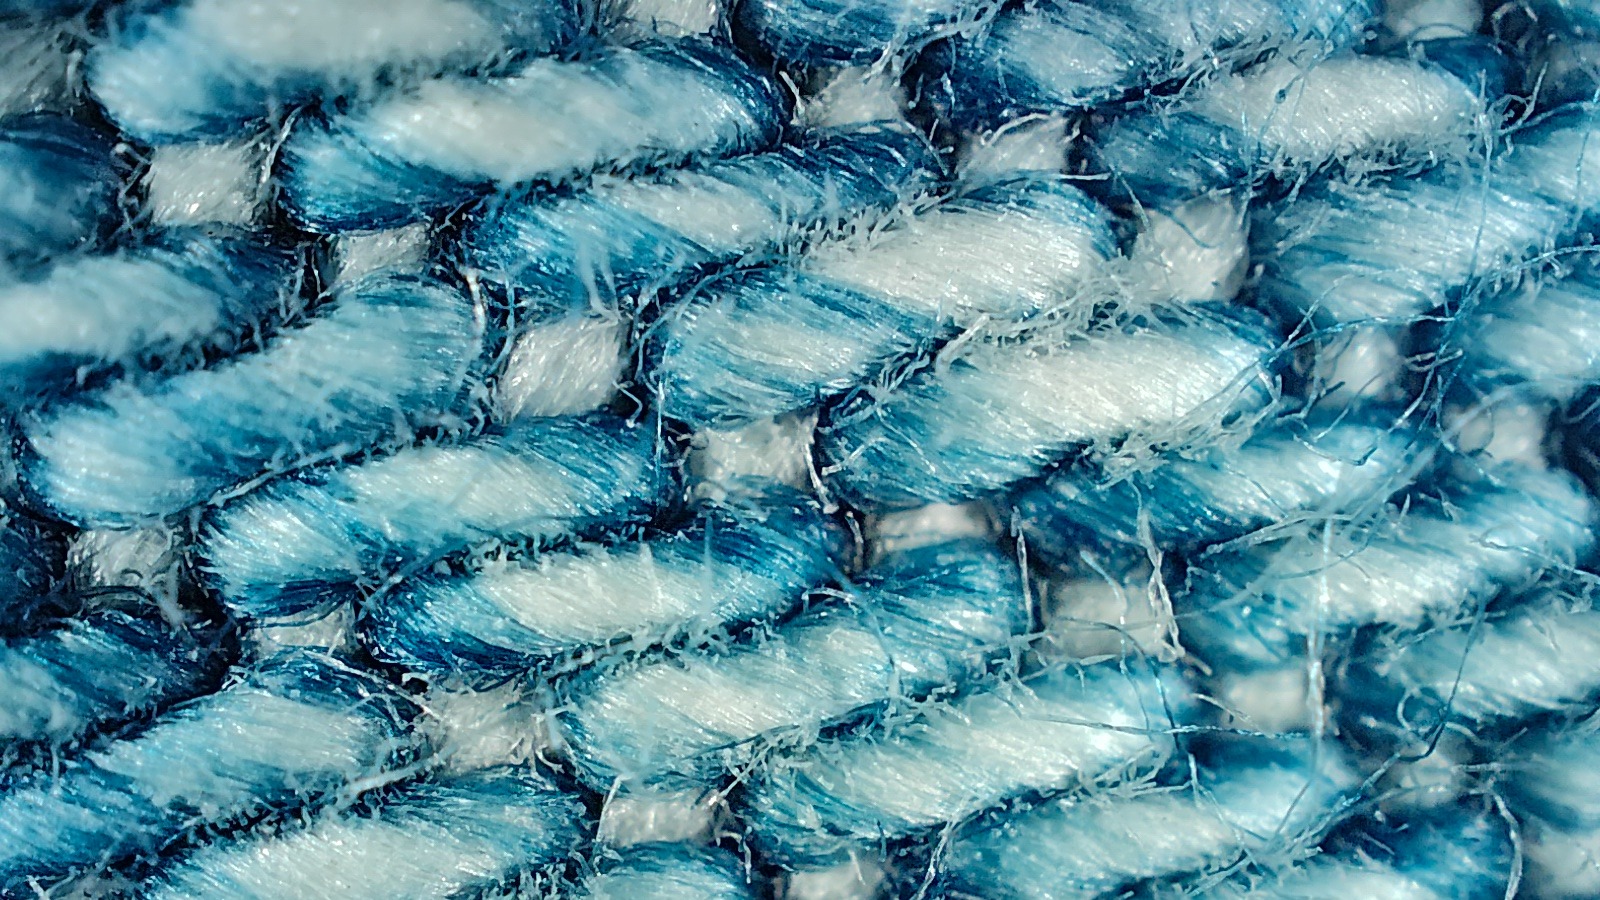 Microscopic photo of a pair of jeans taken using the Realme GT 2 Pro